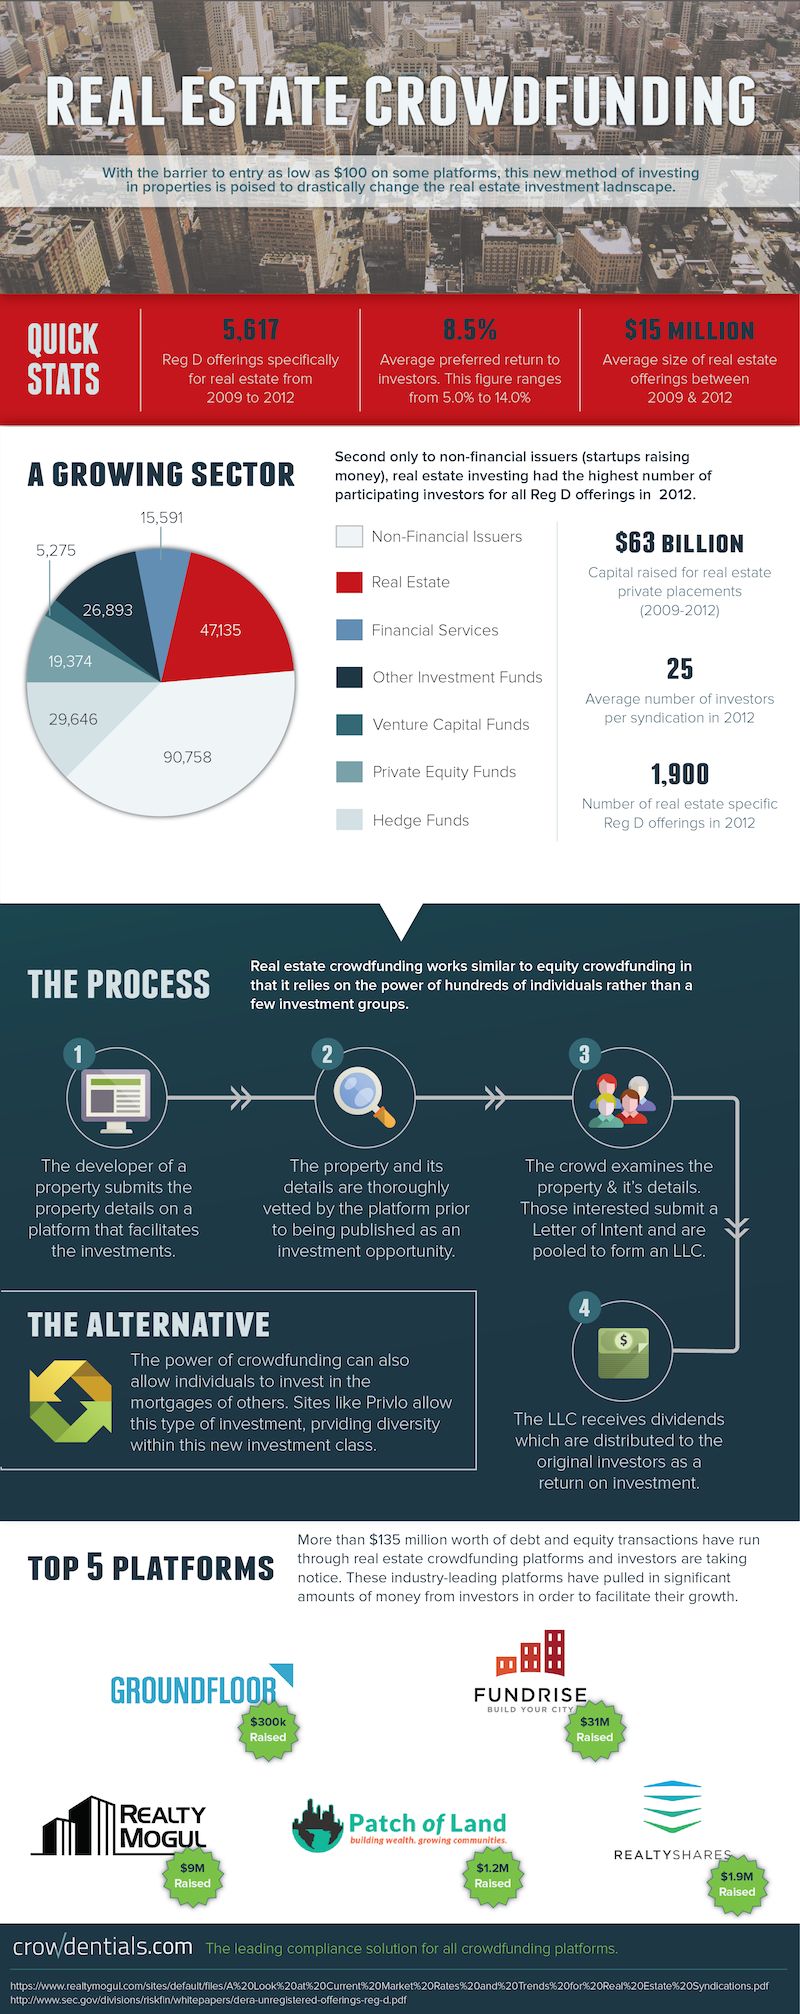 Real-Estate-Crowdfunding-Infographic-2014